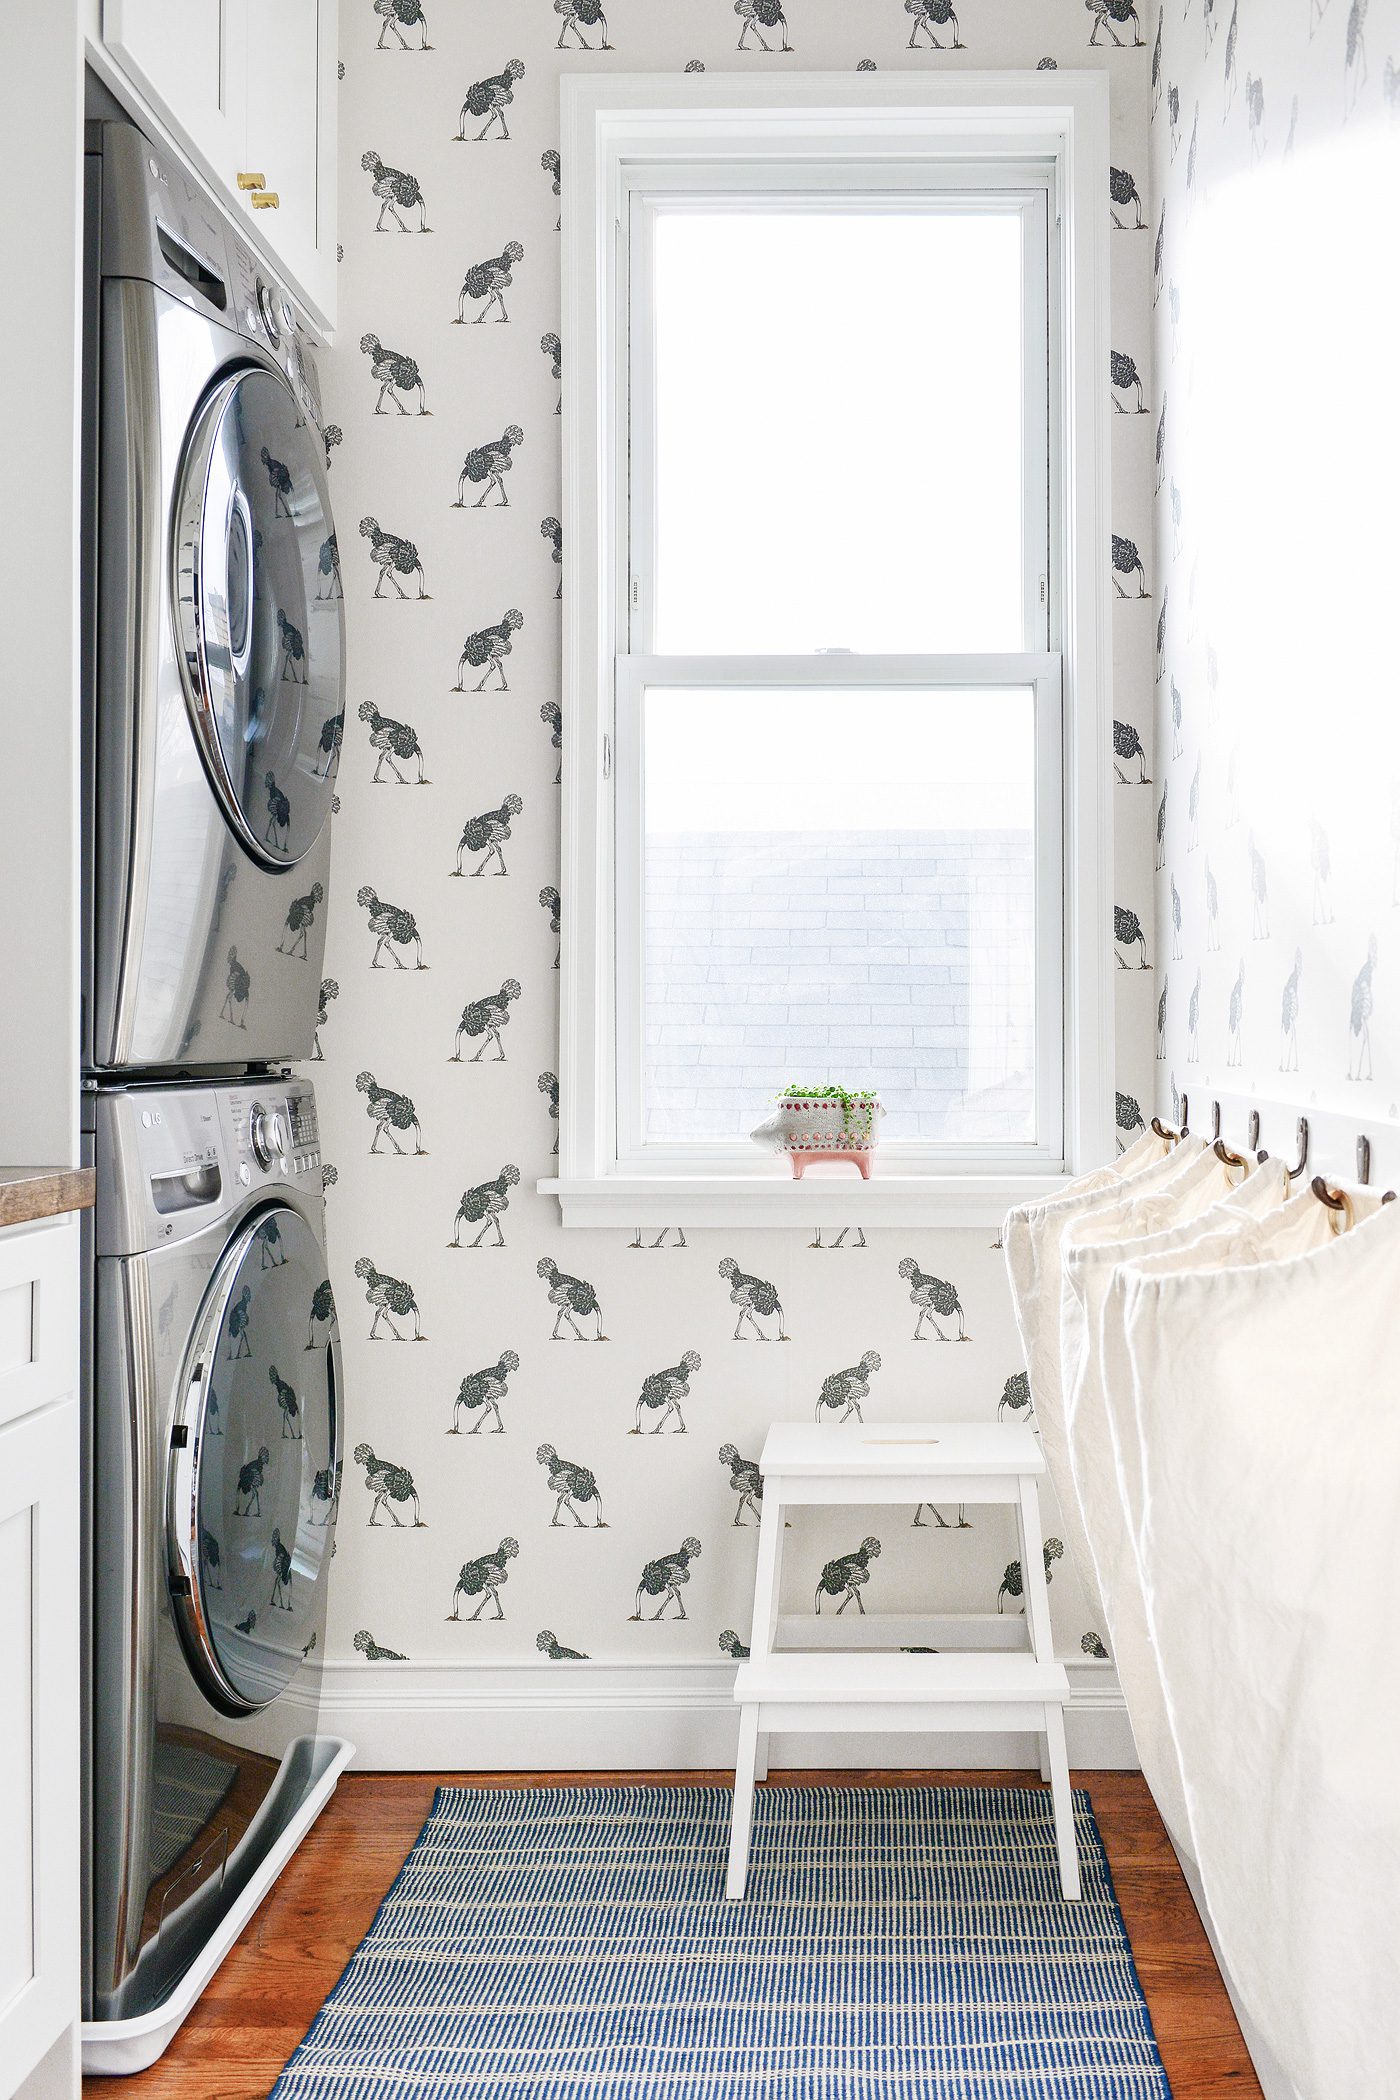 laundry room after // via Yellow Brick Home